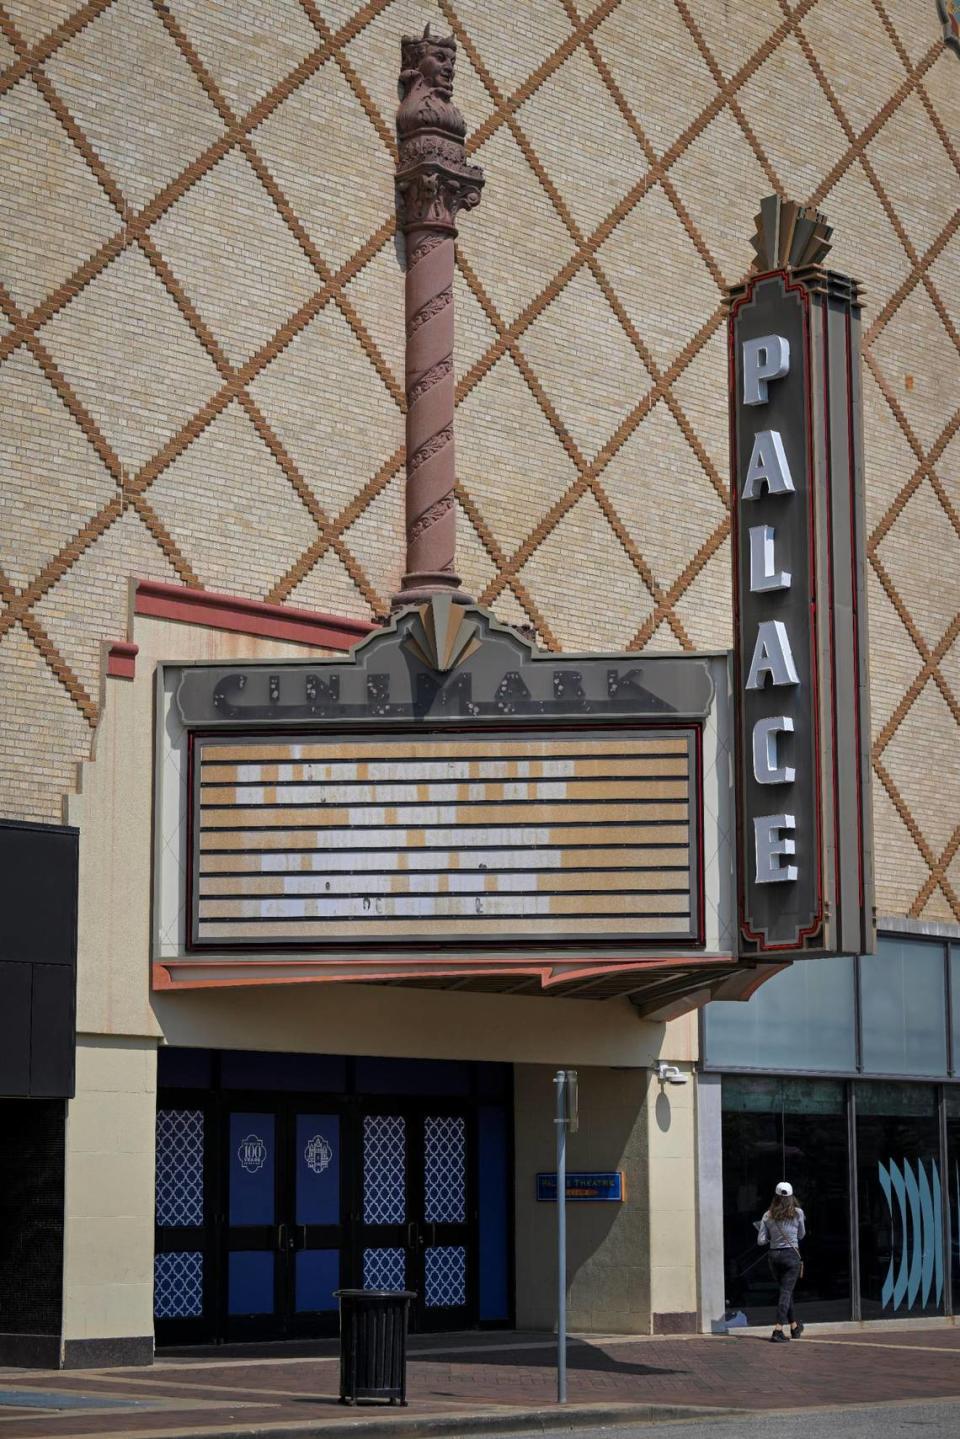 The Cinemark Palace at the Plaza closed in May 2019 and has remained empty since.